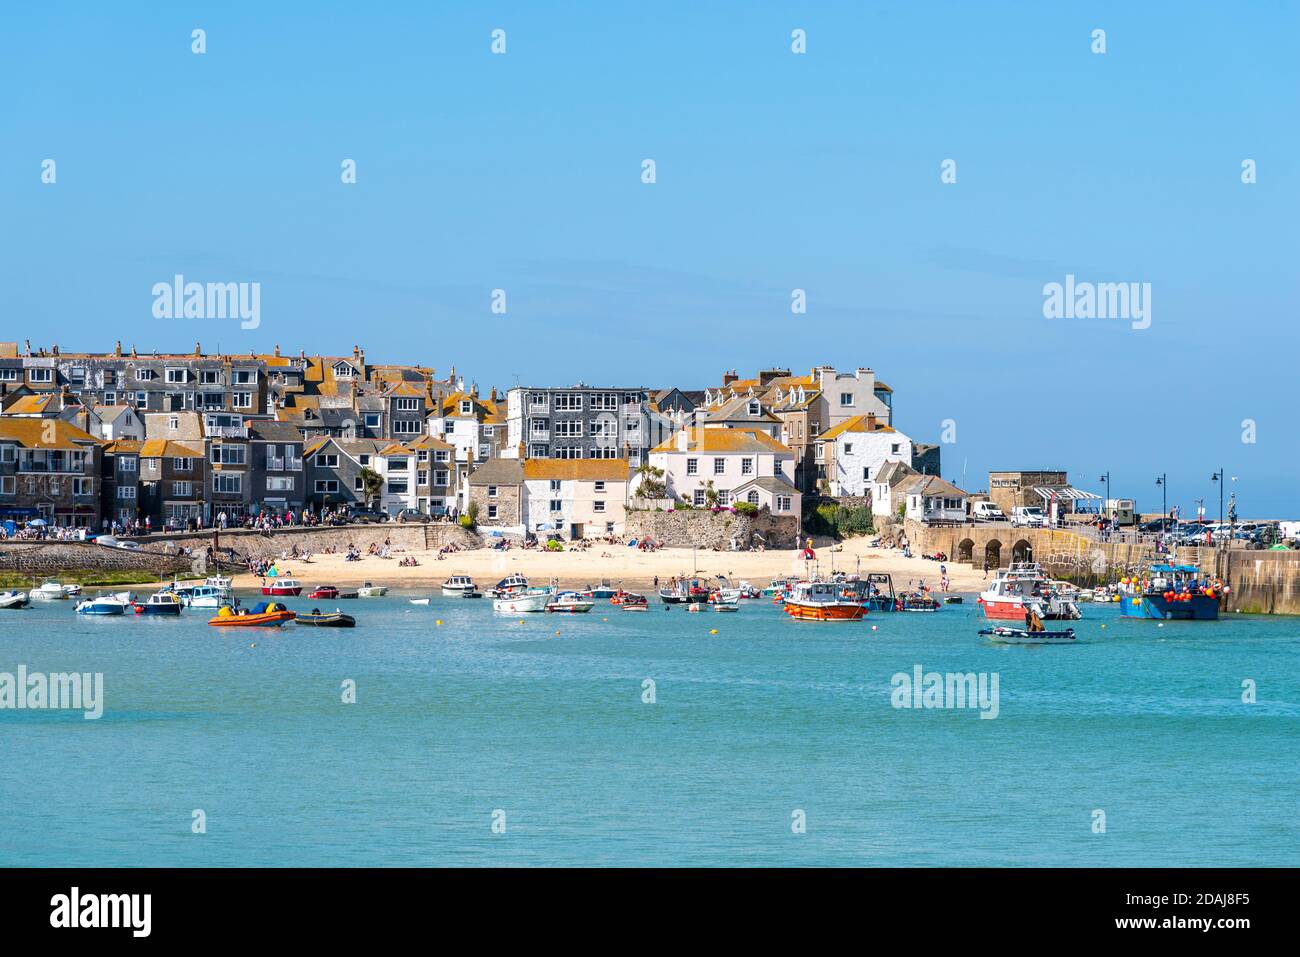 Boats on water in St Ives harbour at high tide. Cornwall, UK Stock Photo